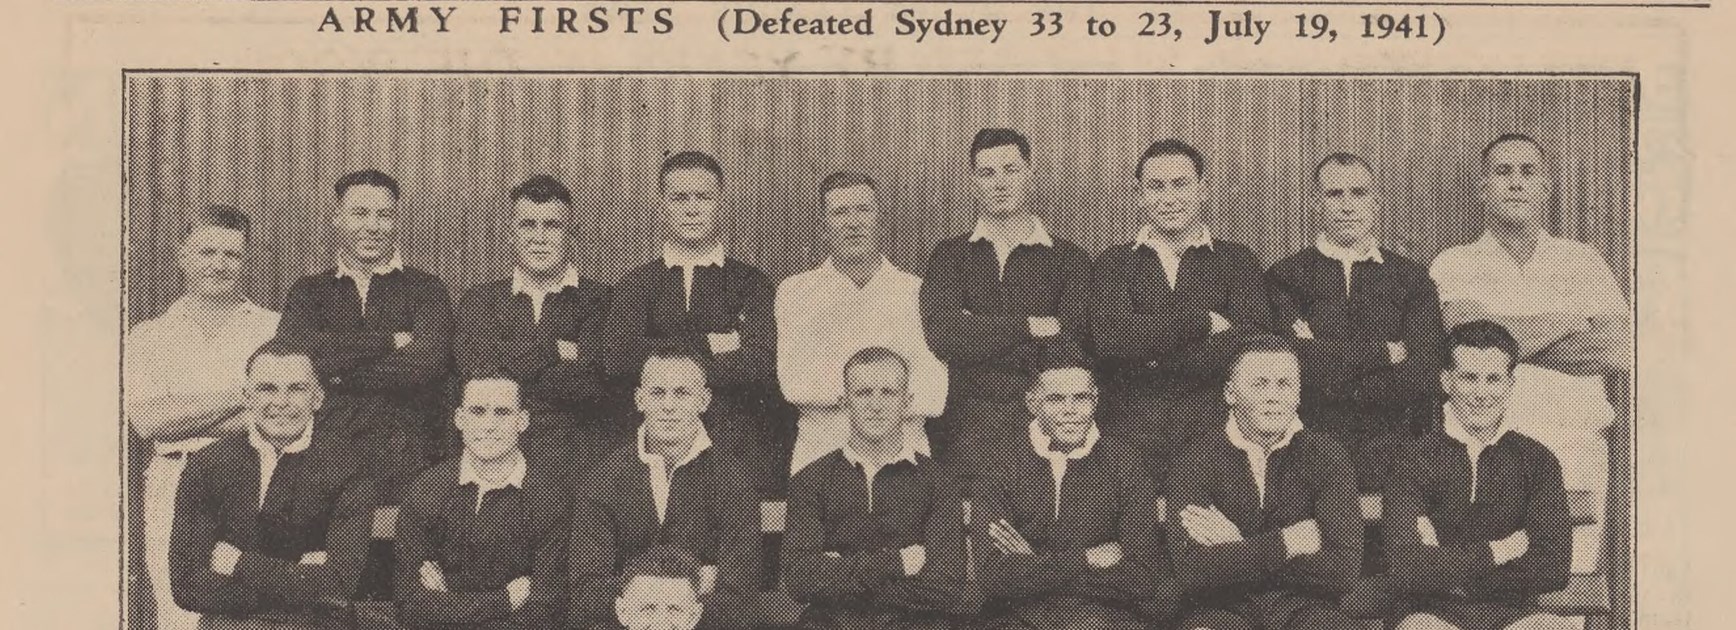 Anzac Day history: Rugby League Army heroes